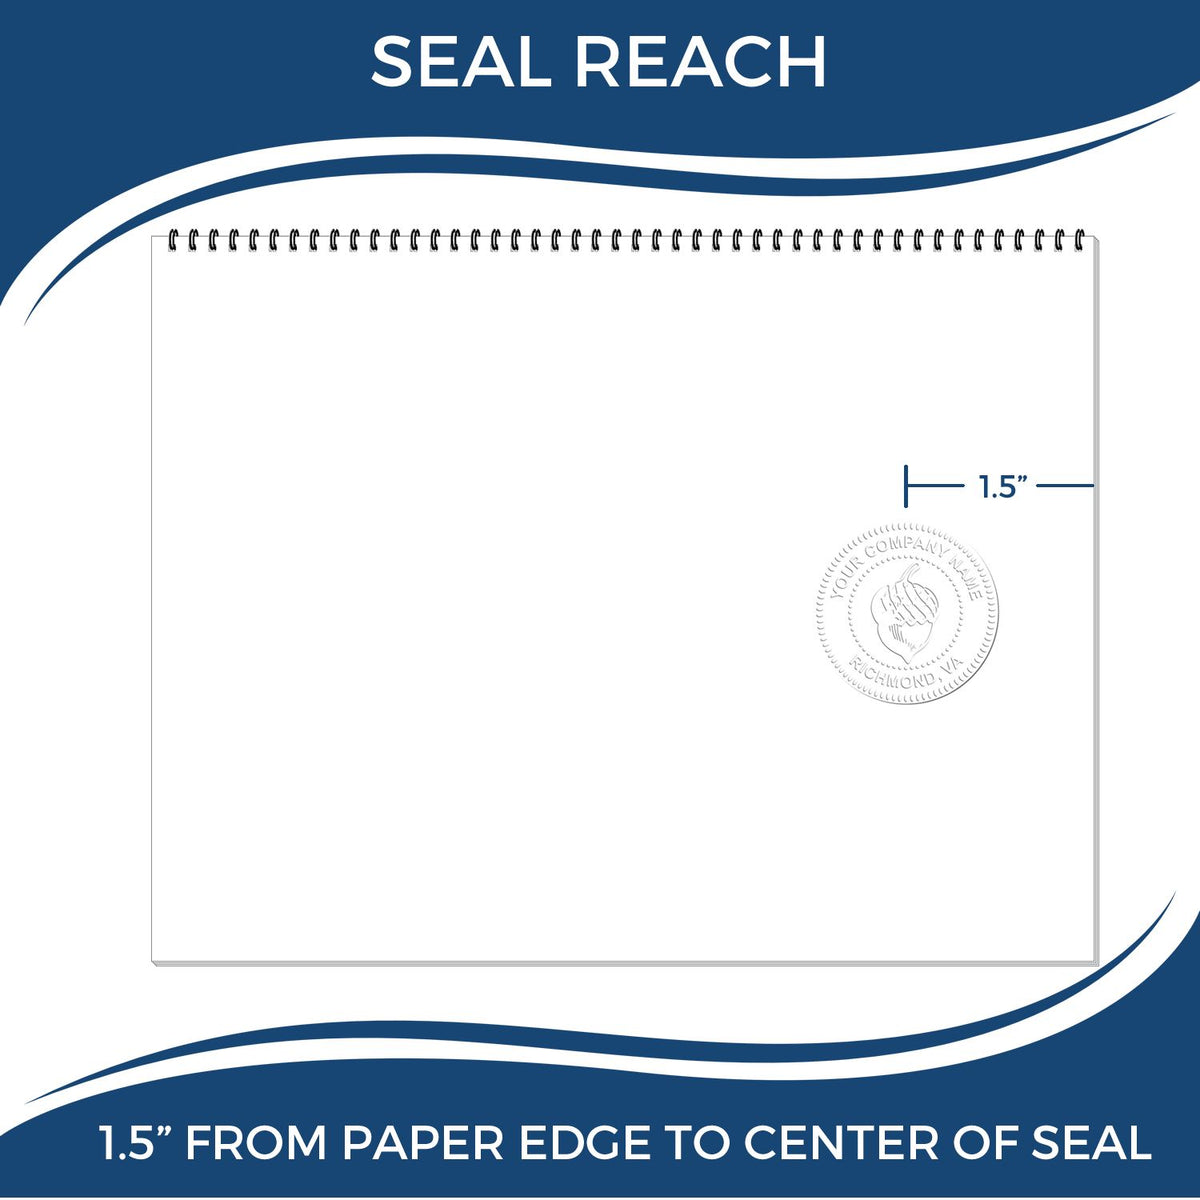 An infographic showing the seal reach which is represented by a ruler and a miniature seal image of the State of Arkansas Soft Land Surveyor Embossing Seal